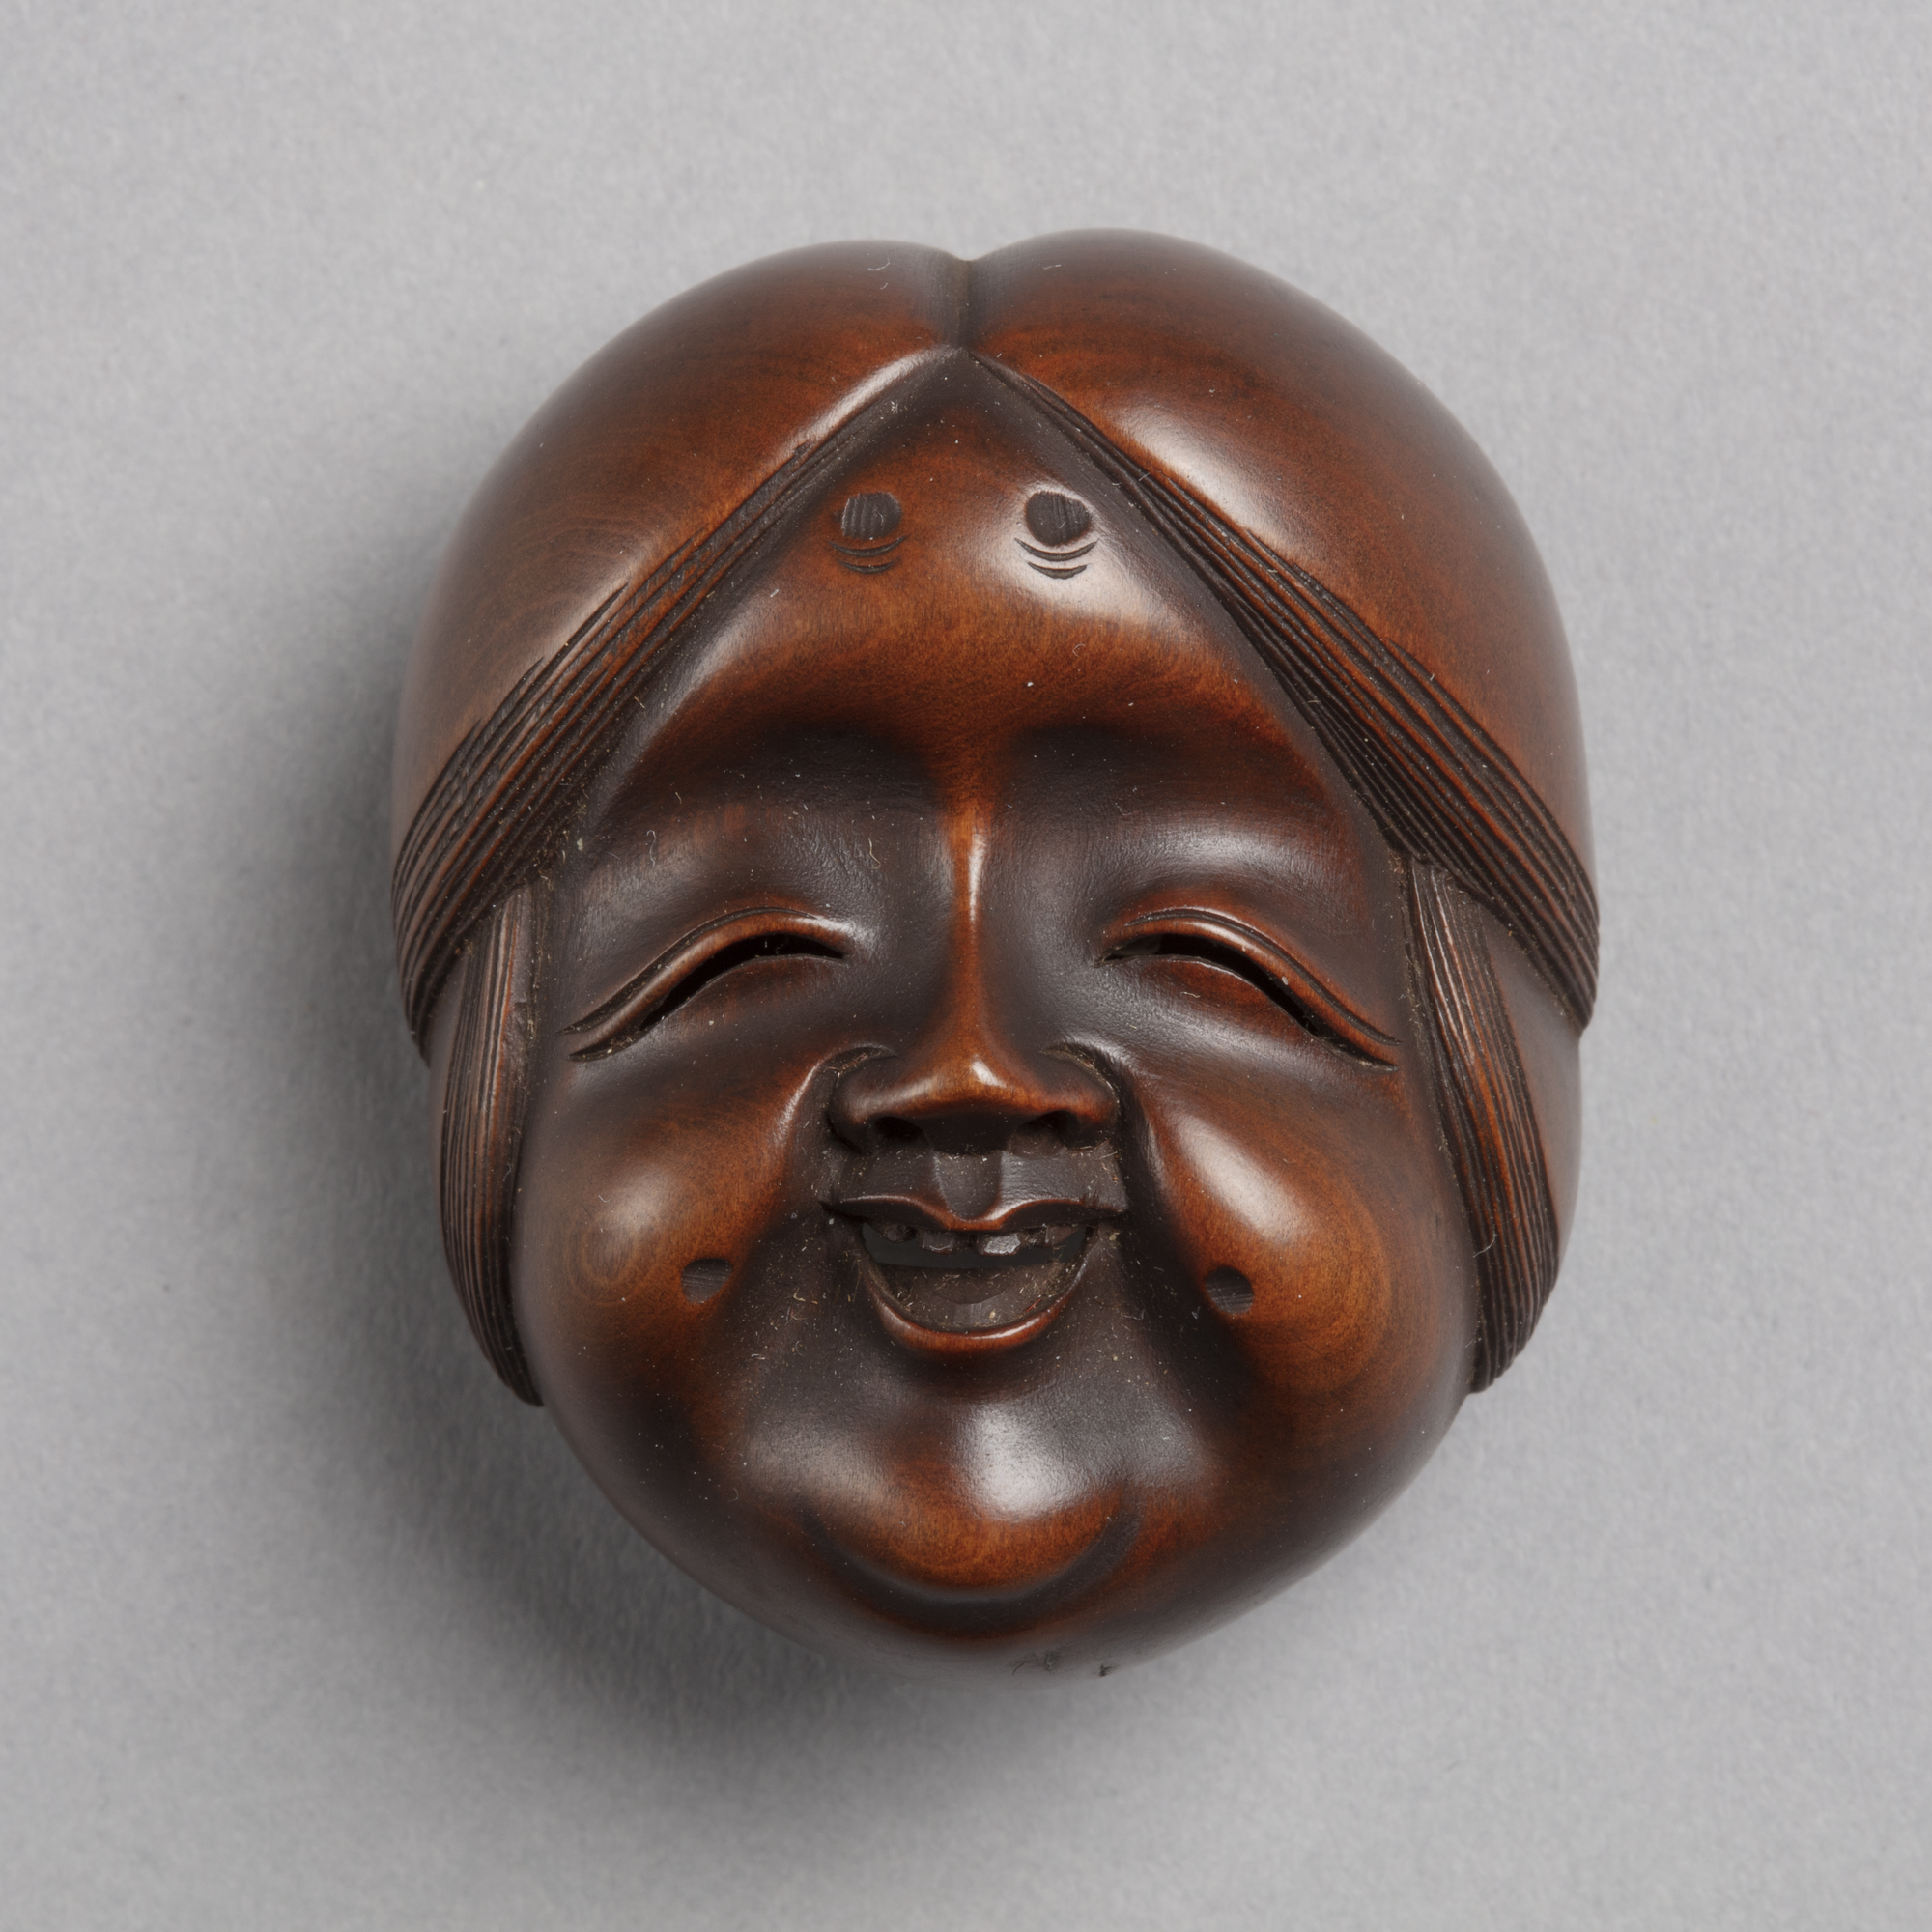 A Japanese boxwood netsuke of the face of Okame, the goddess of mirth. She has large cheeks and a joyful smile.